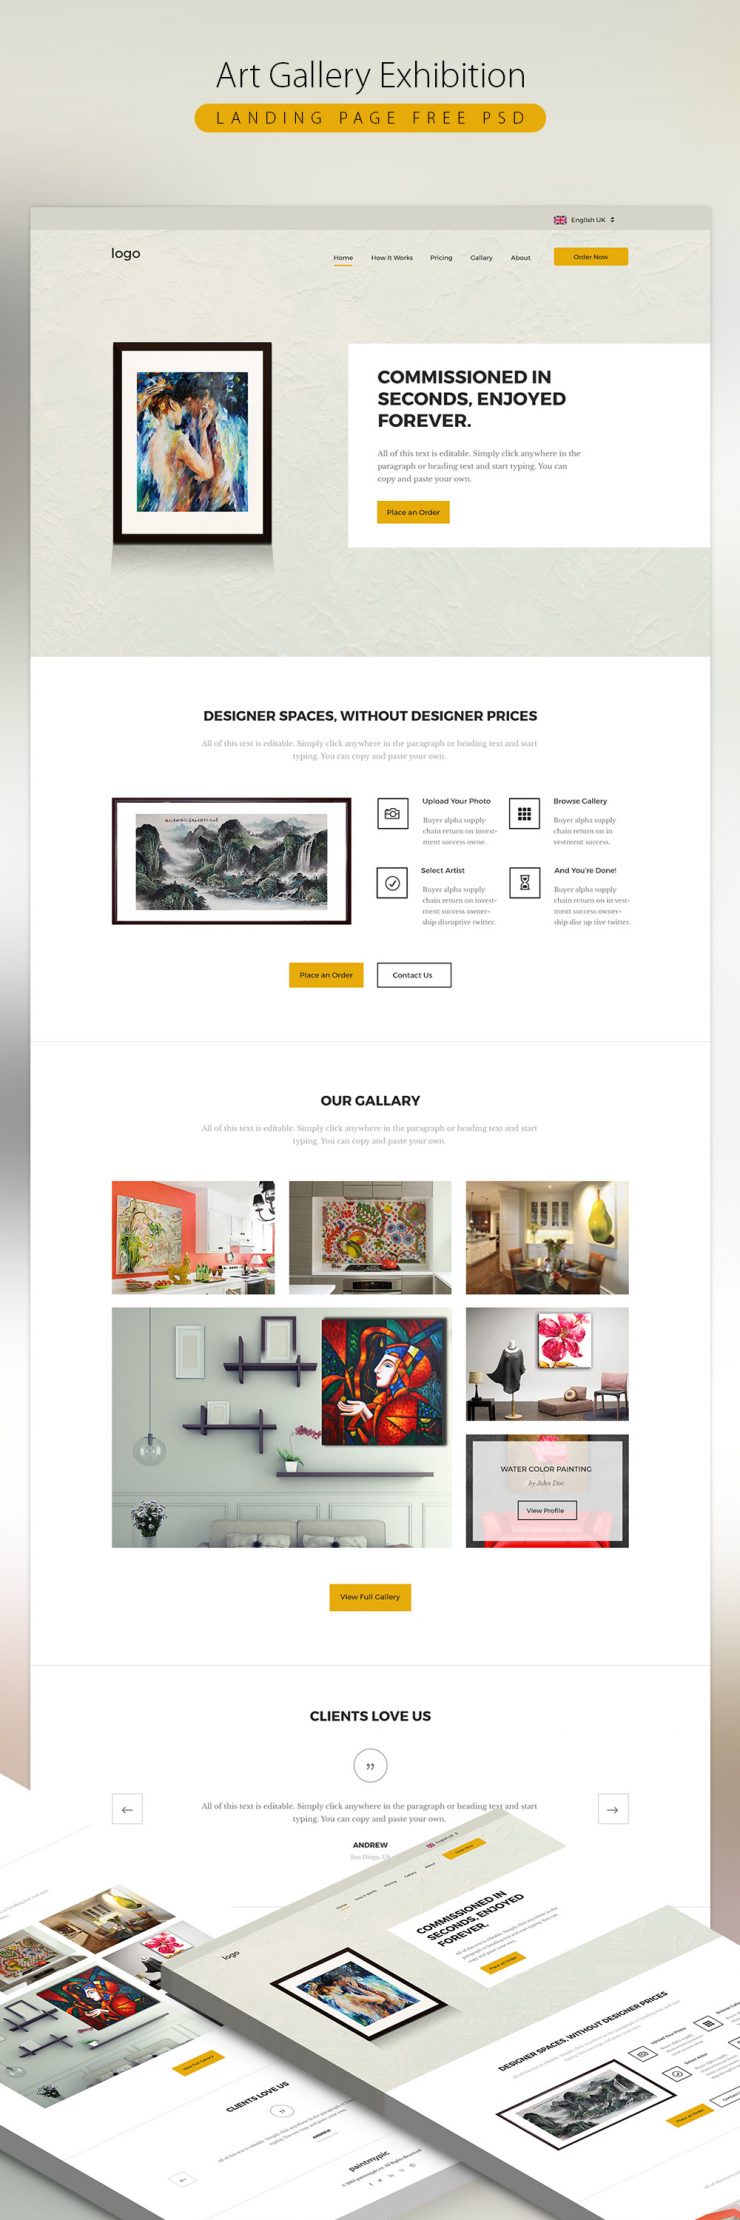 Art Gallery Exhibition Landing page Free PSD